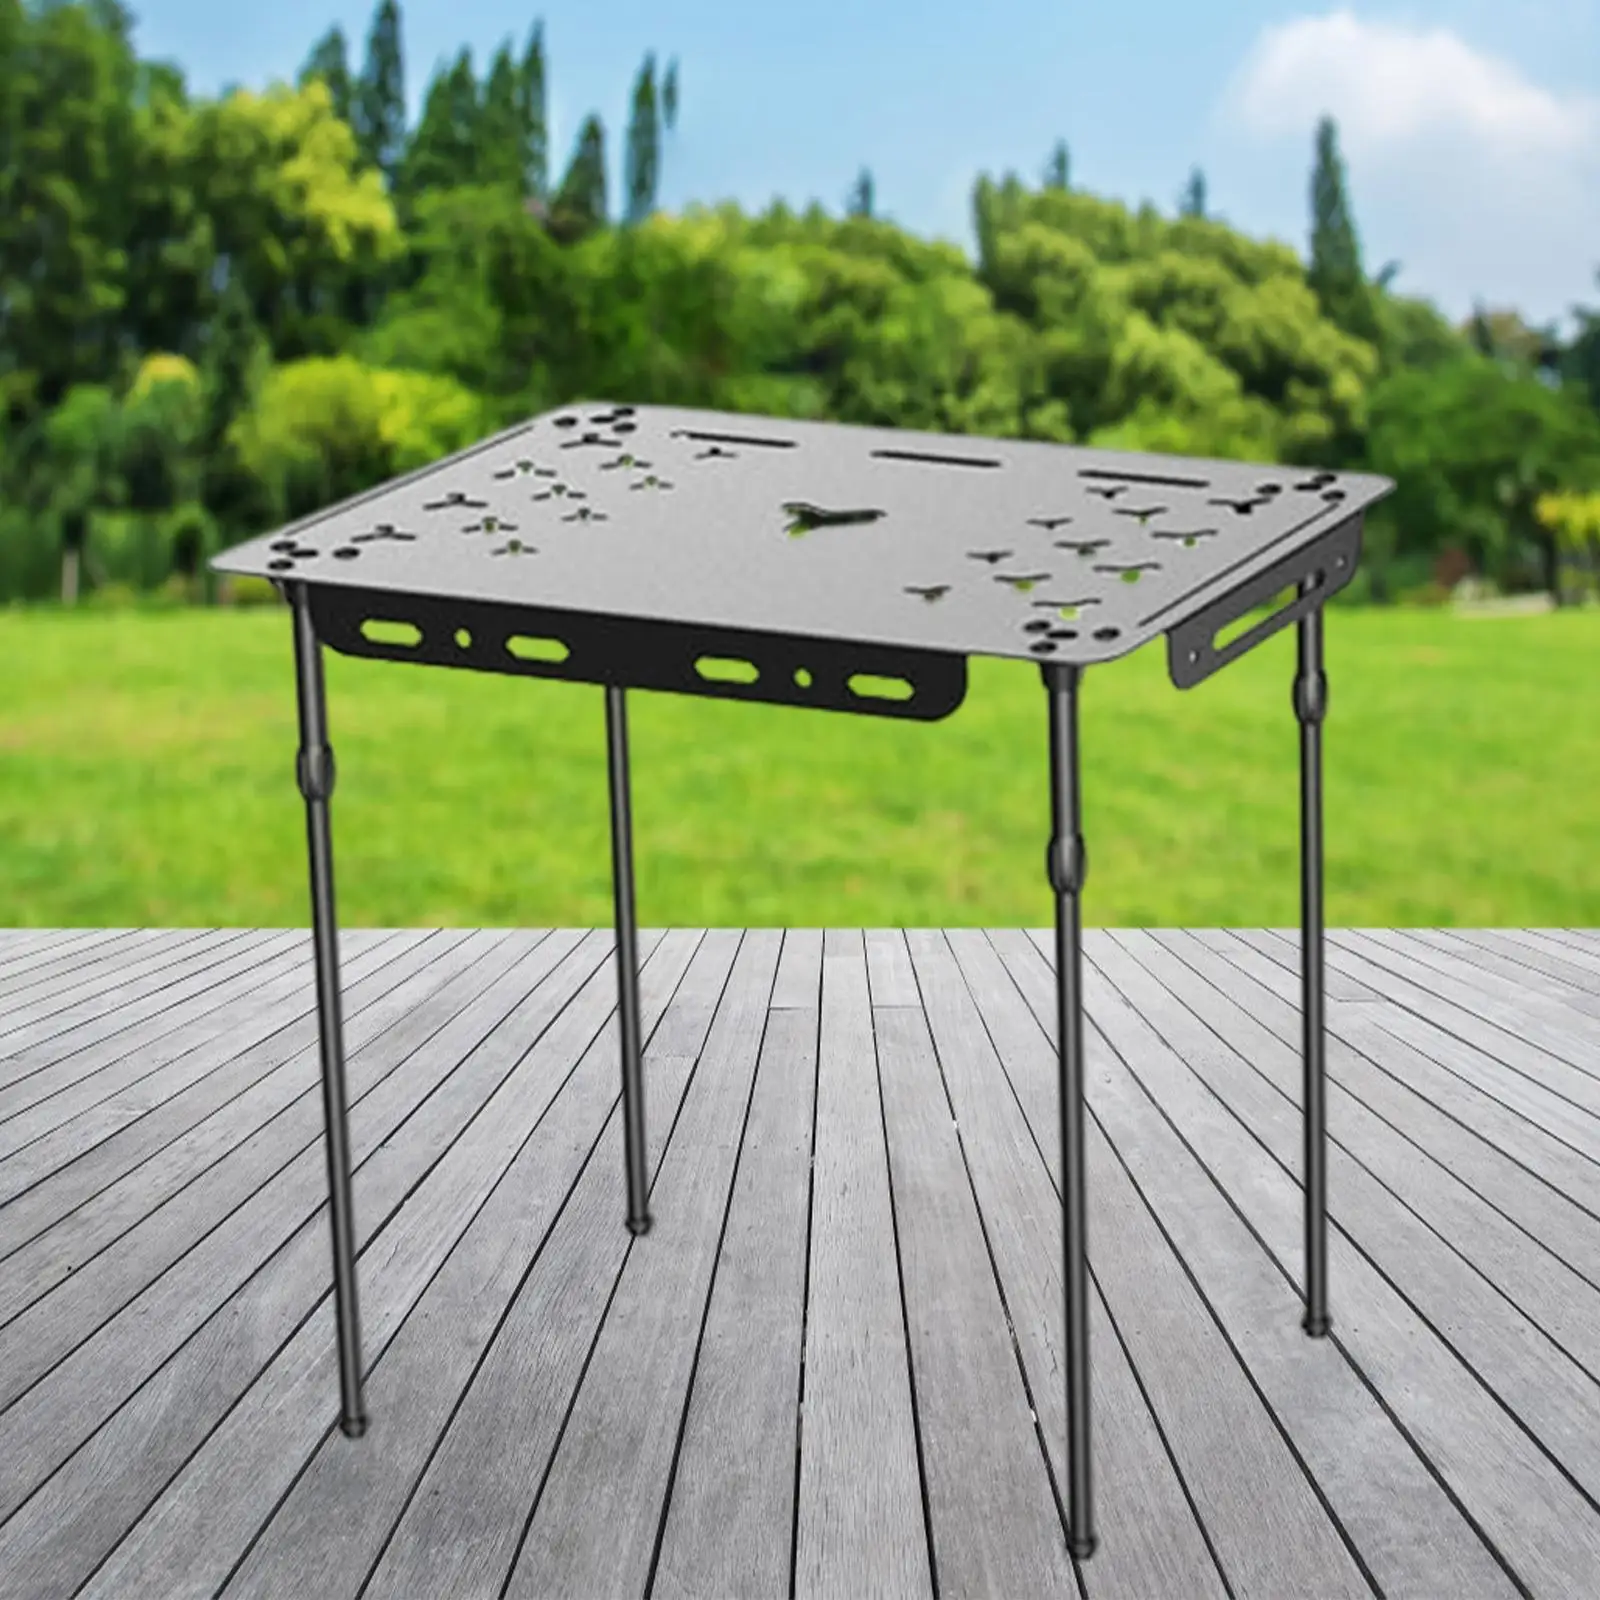 Lightweight Camping Folding Dining Table Tableware Collapsible Furniture Heavy Duty for Travel Fishing BBQ Patio Balcony